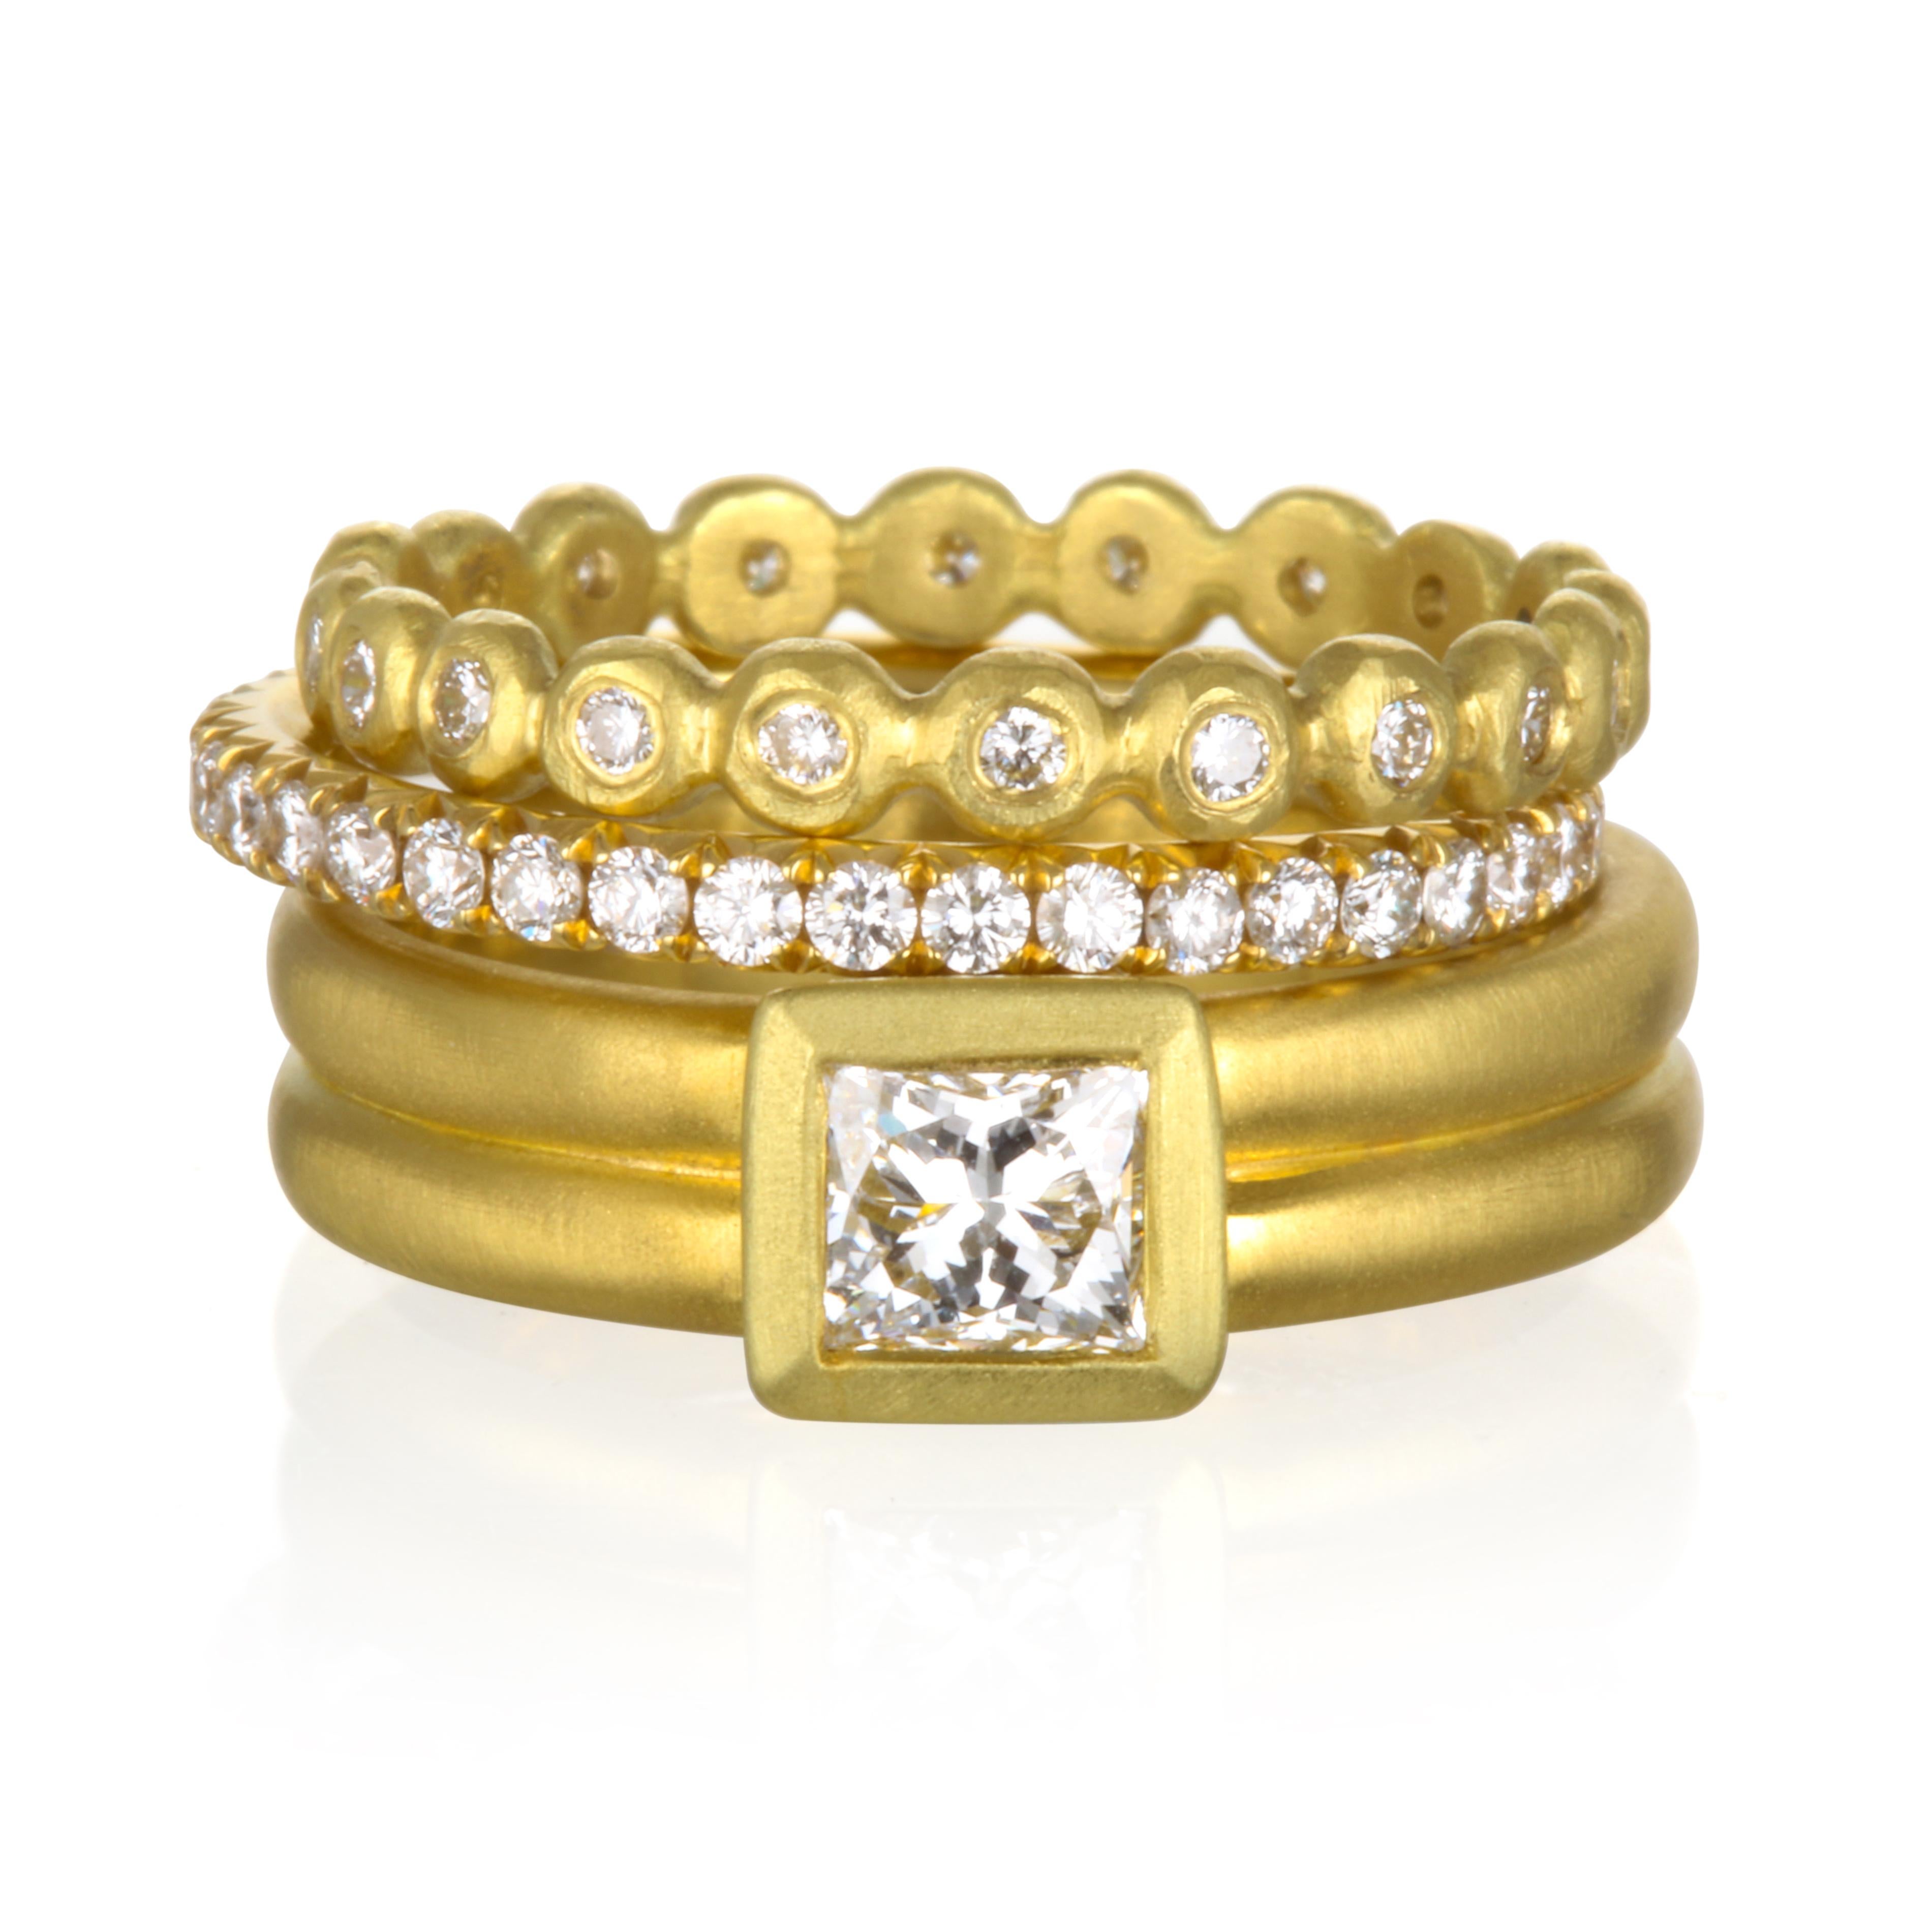 Faye Kim 18 Karat Gold Diamond Small Granulation Bead Ring In New Condition For Sale In Westport, CT